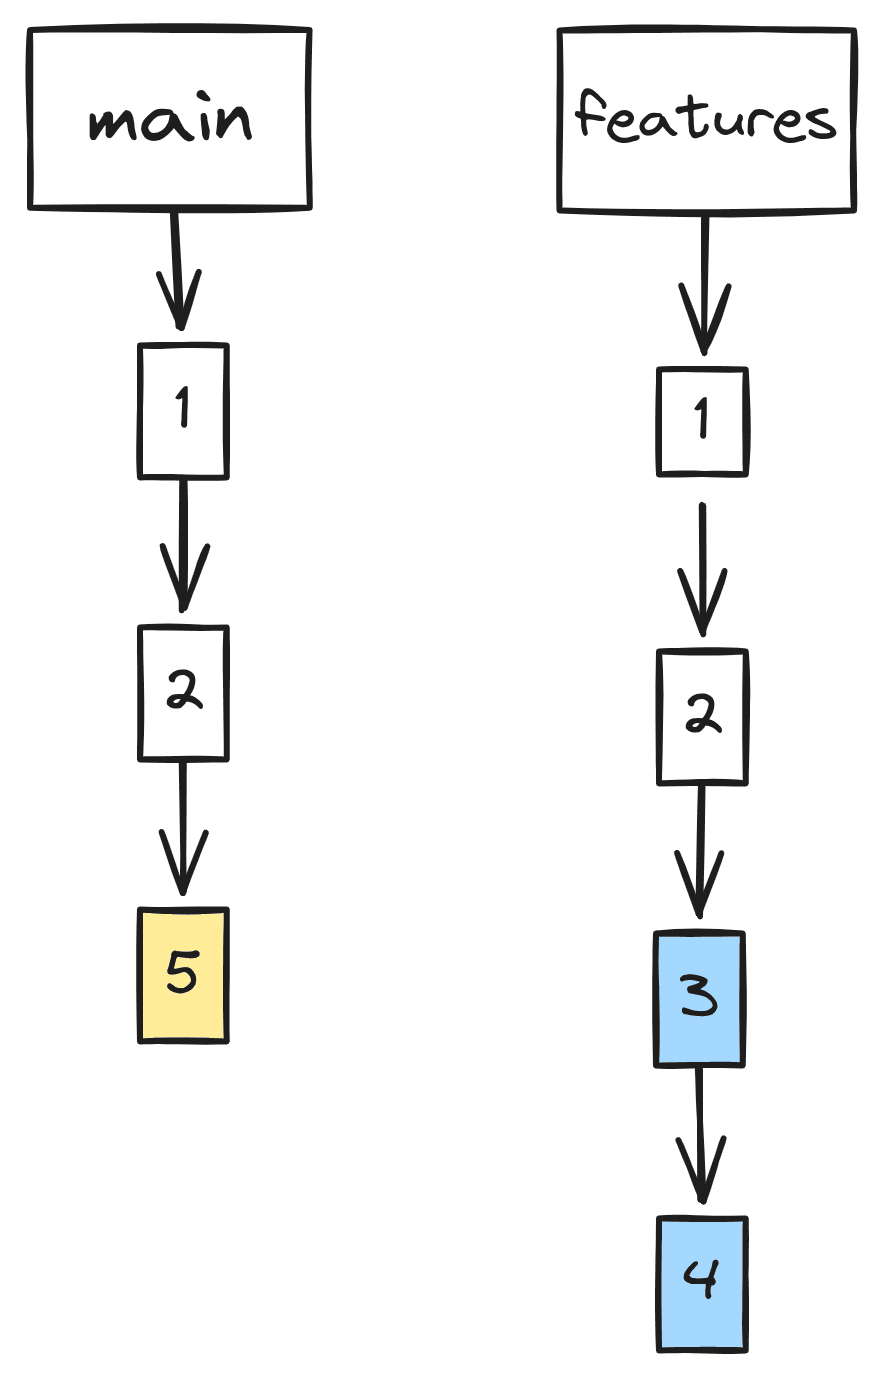 An image illustrating the status of the main and the feature branch before the merge